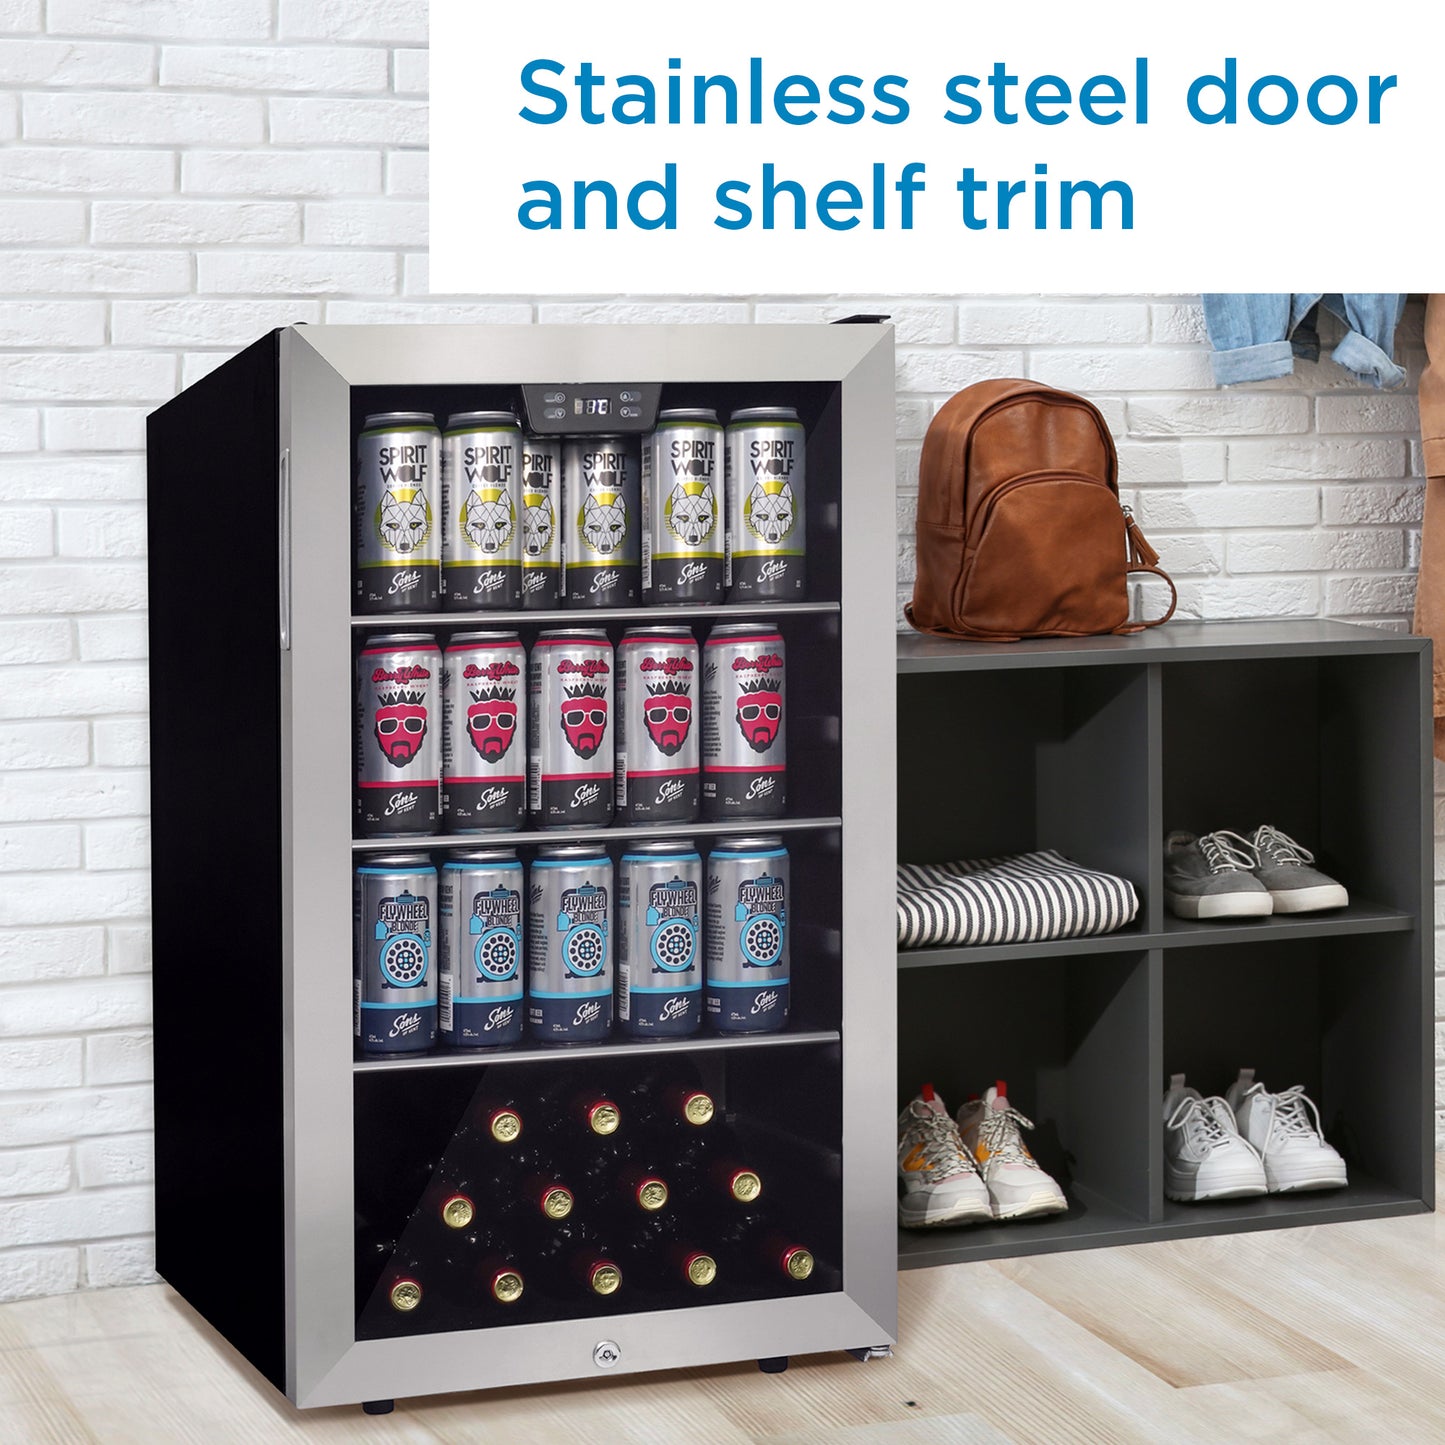 Danby 4.5 cu. ft. Free-Standing Beverage Center in Stainless Steel - DBC045L1SS